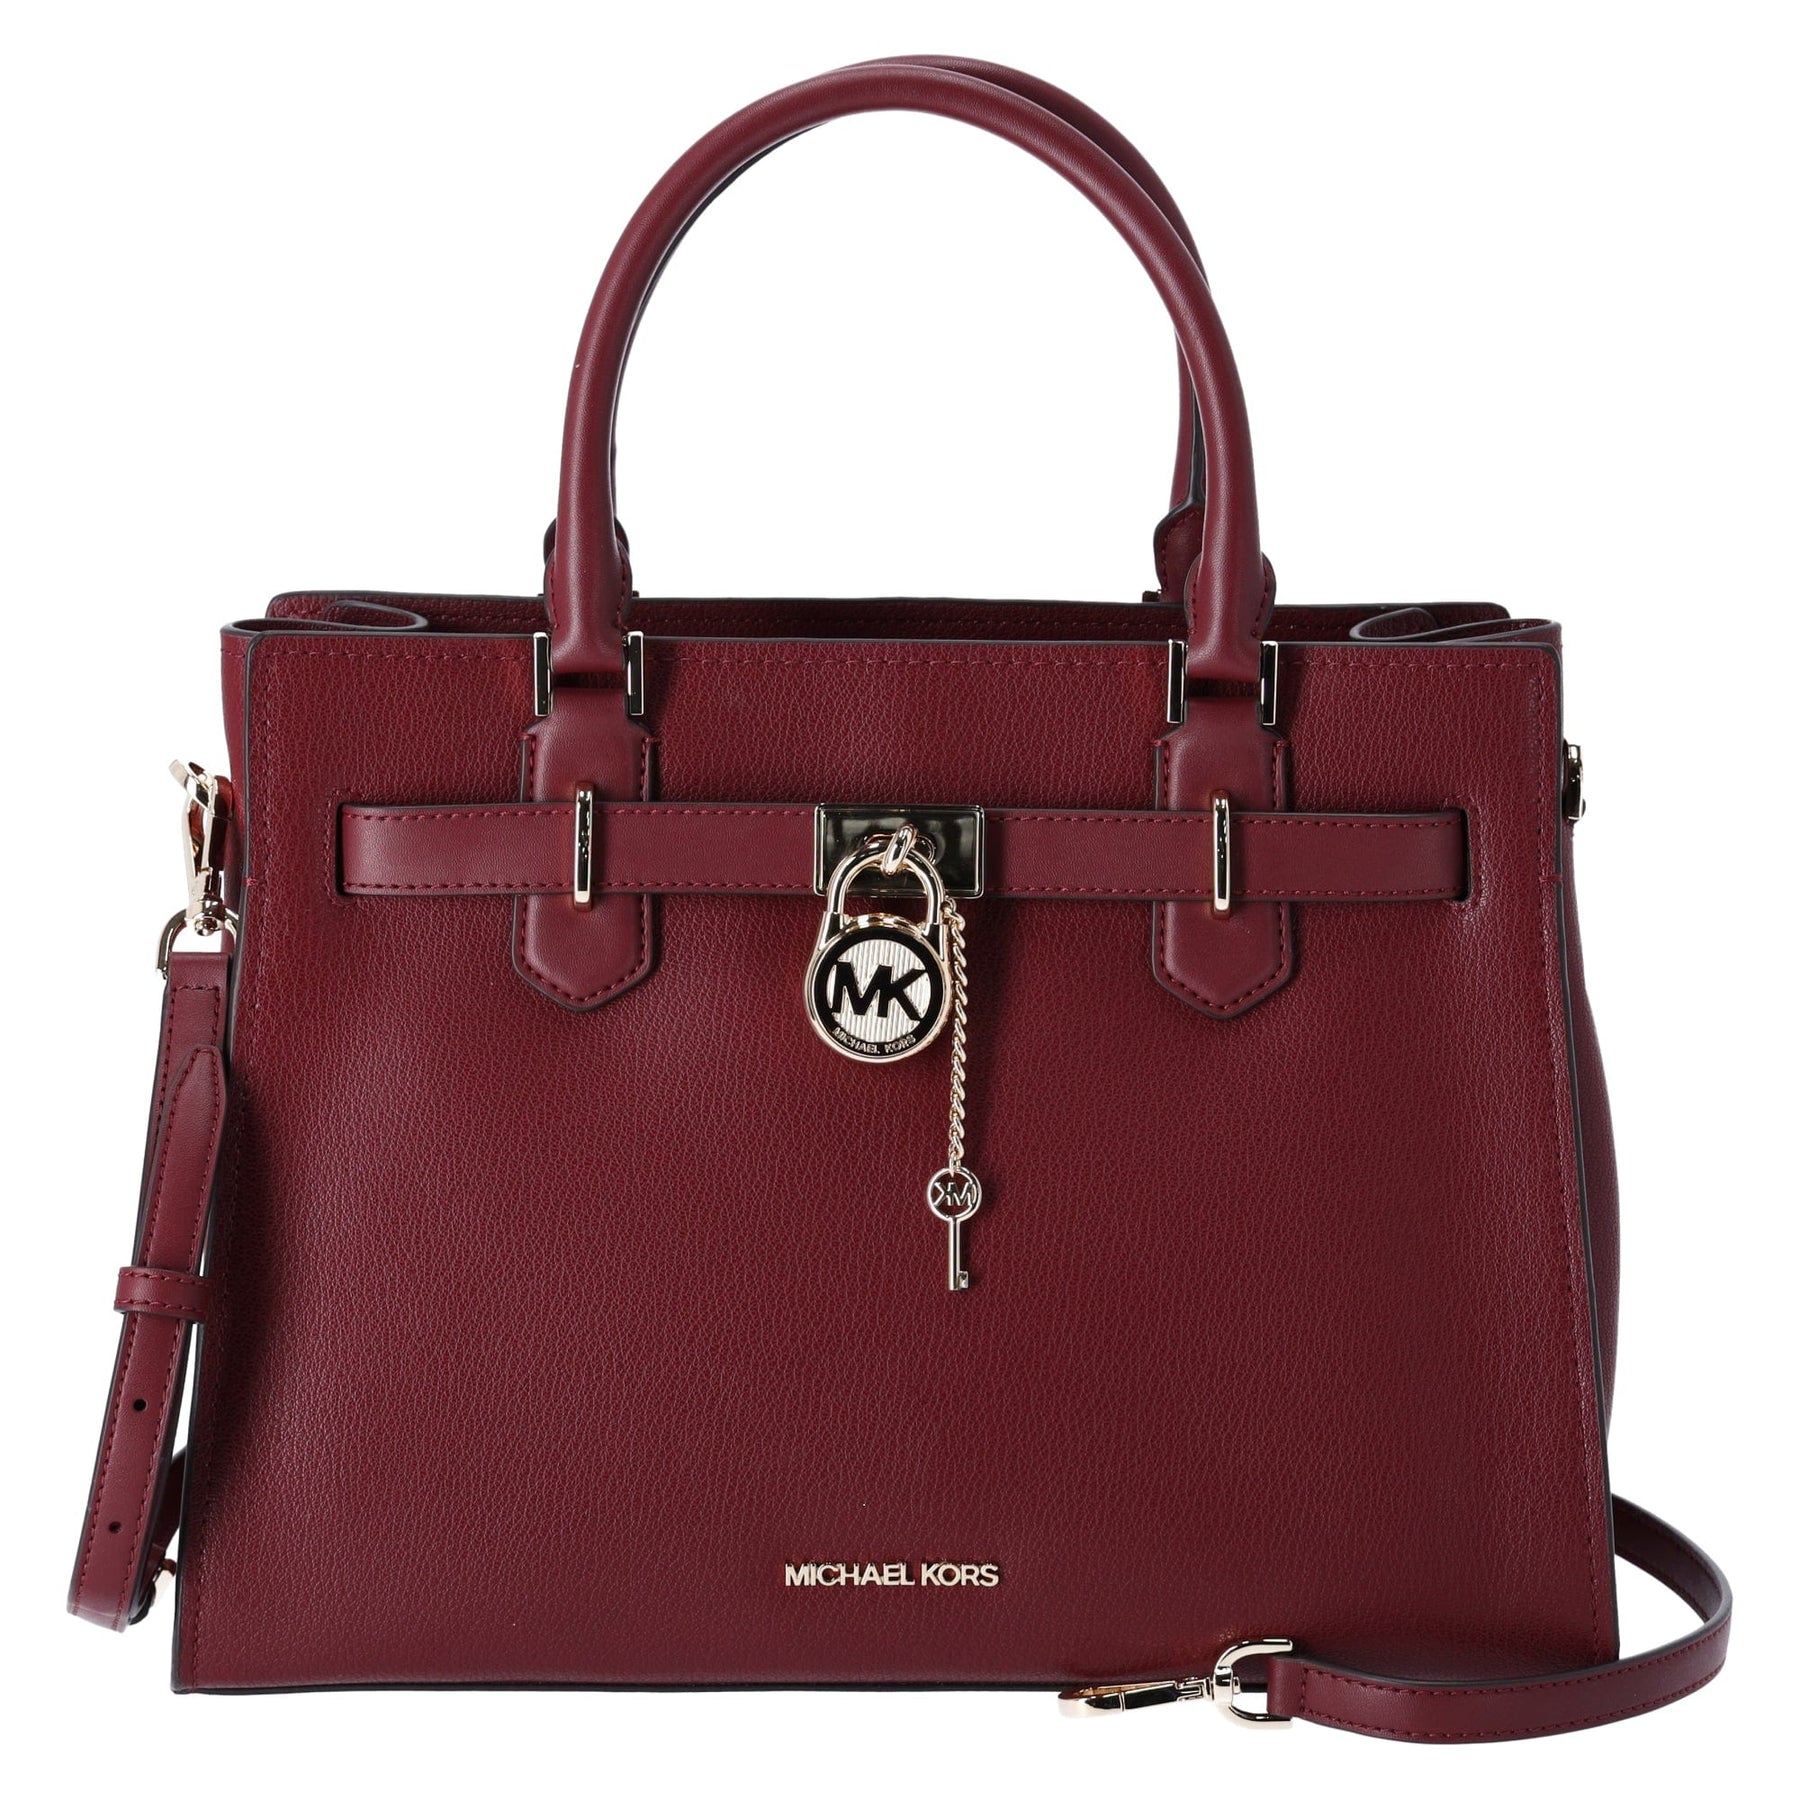 Michael Kors Bags, Wallets, Backpacks, and Passport Cases | Gaby's Bags